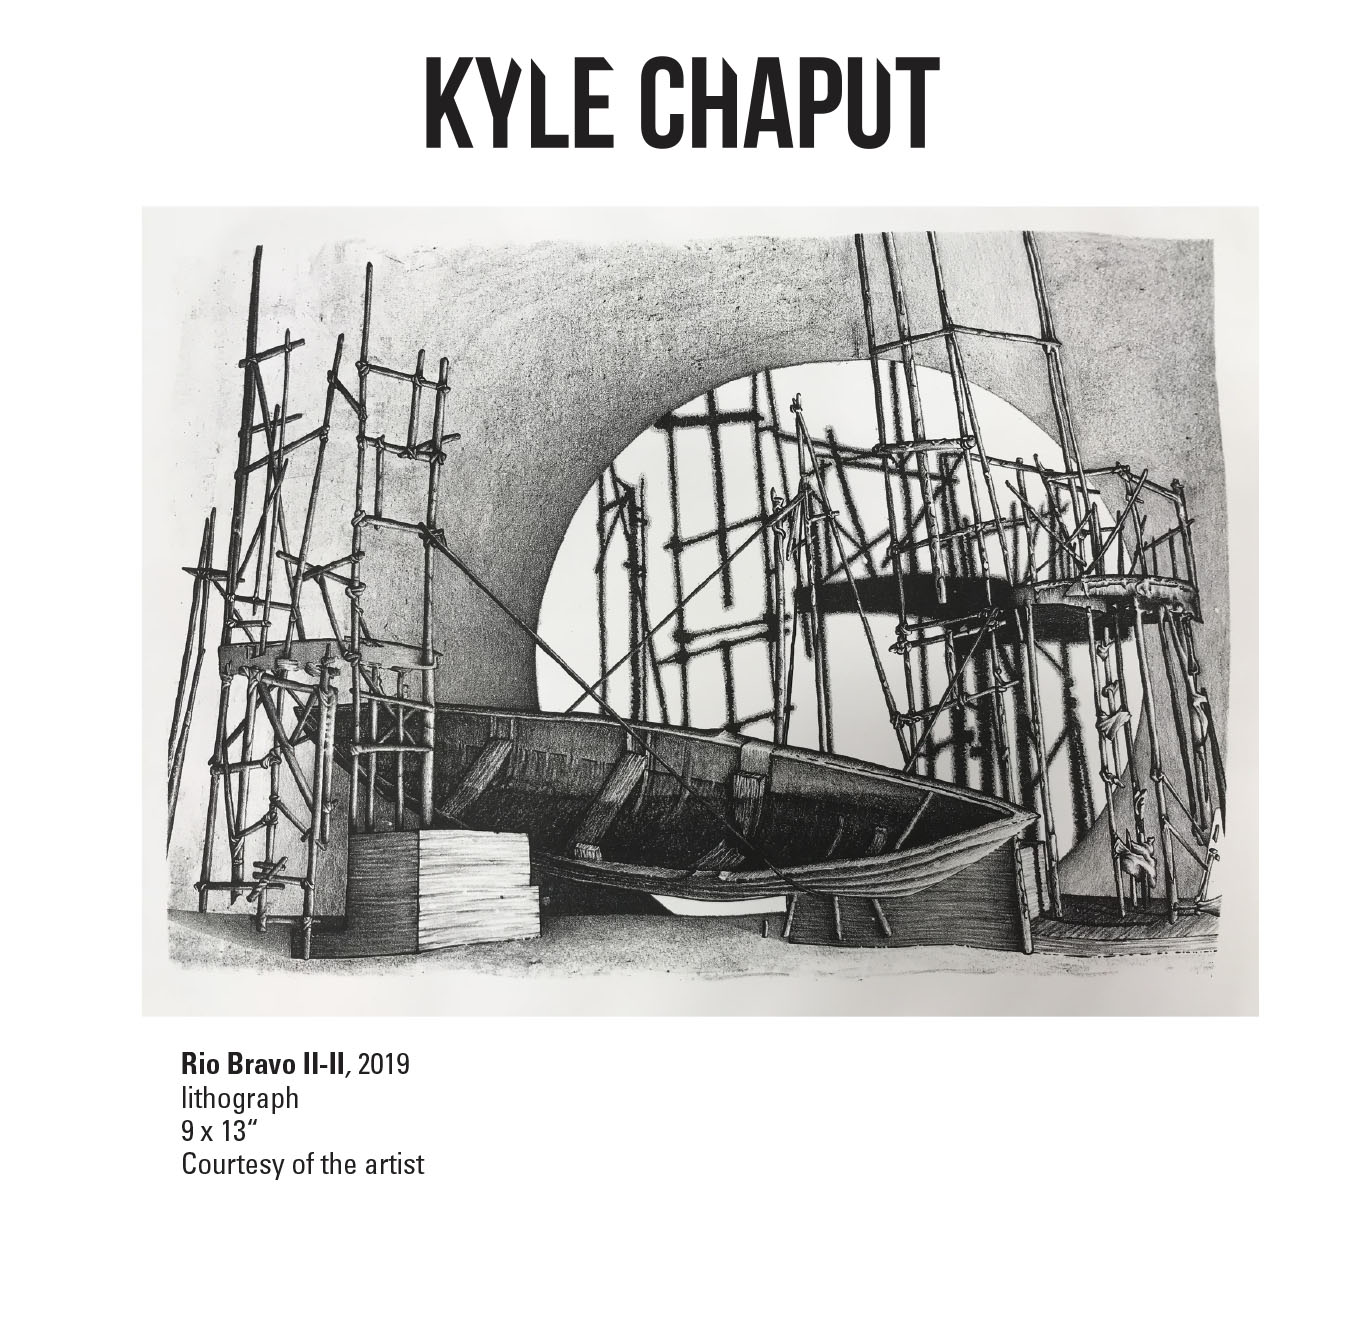 Kyle Chaput, Rio Bravo II-II, 2019 lithograph 9 x 13“ Courtesy of the artist. A small boat that appears to be surrounded by scaffolding